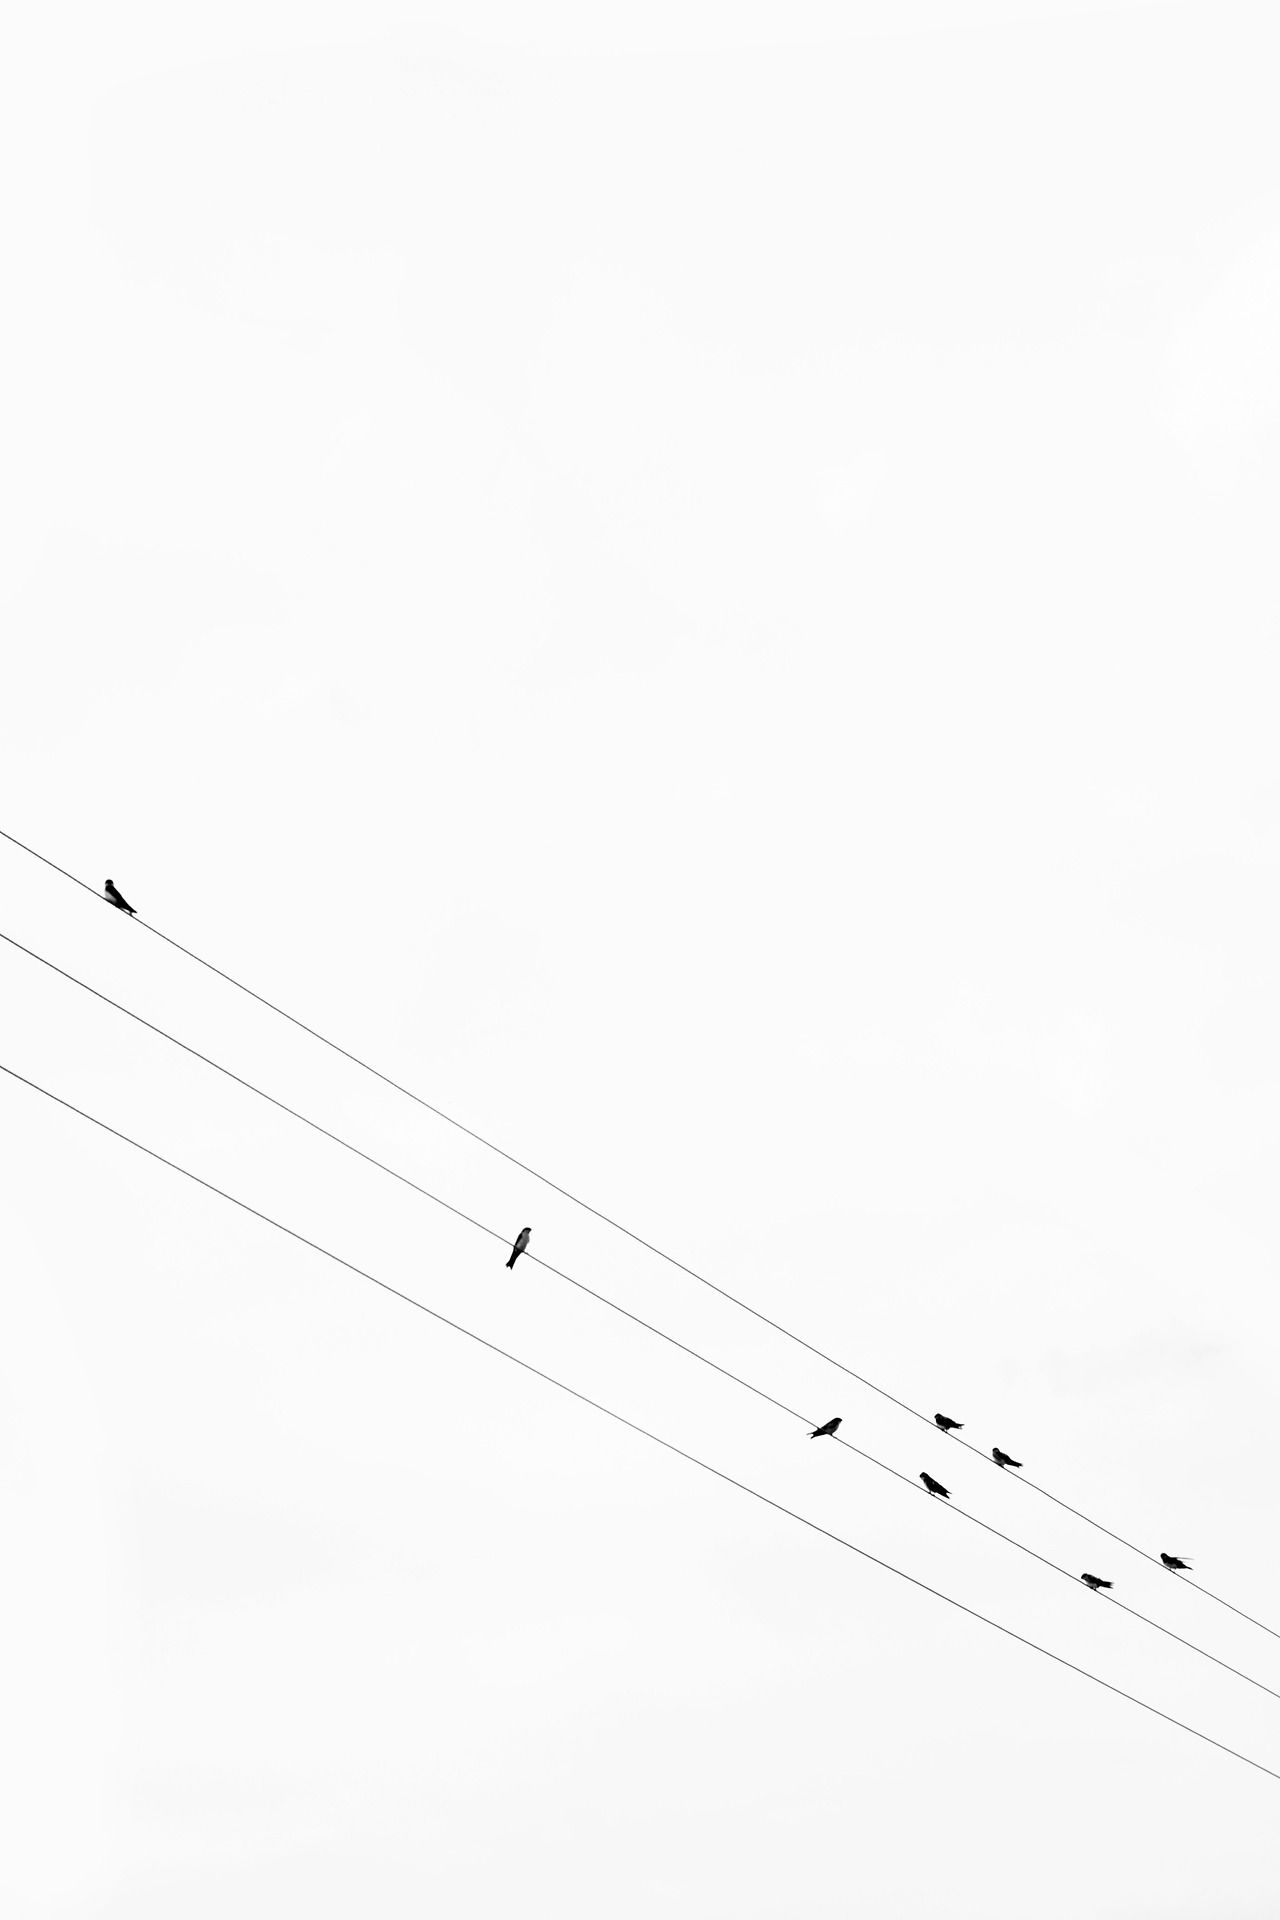 on a wire. Minimalist photography, White aesthetic, Minimalist wallpaper